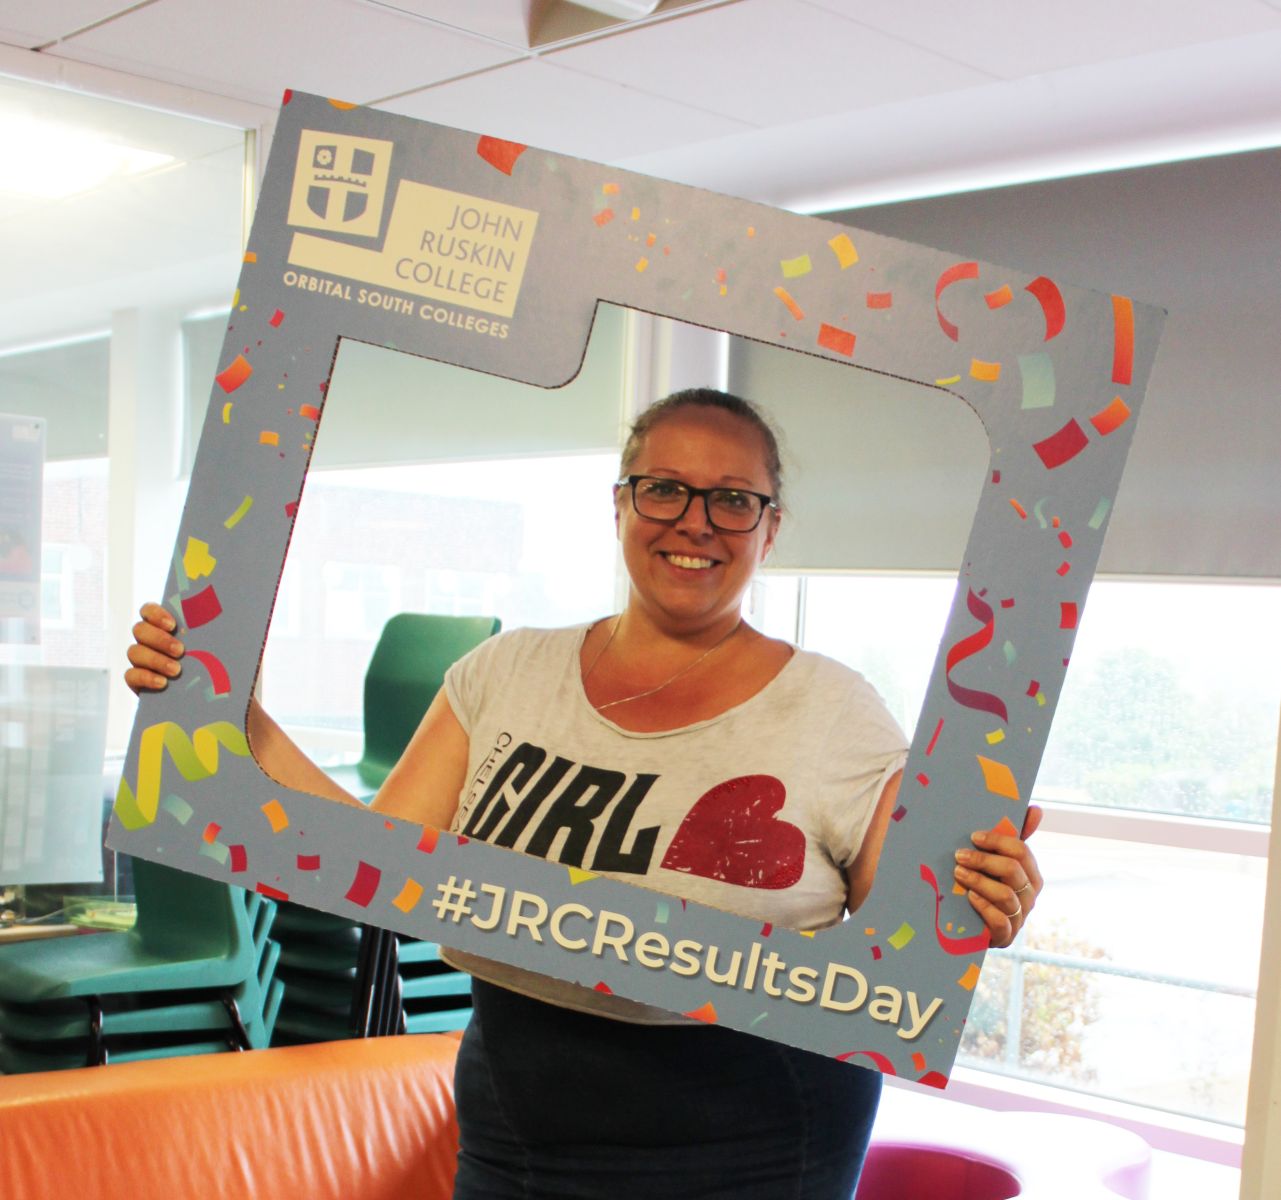 Student holding selfie frame to celebrate results day